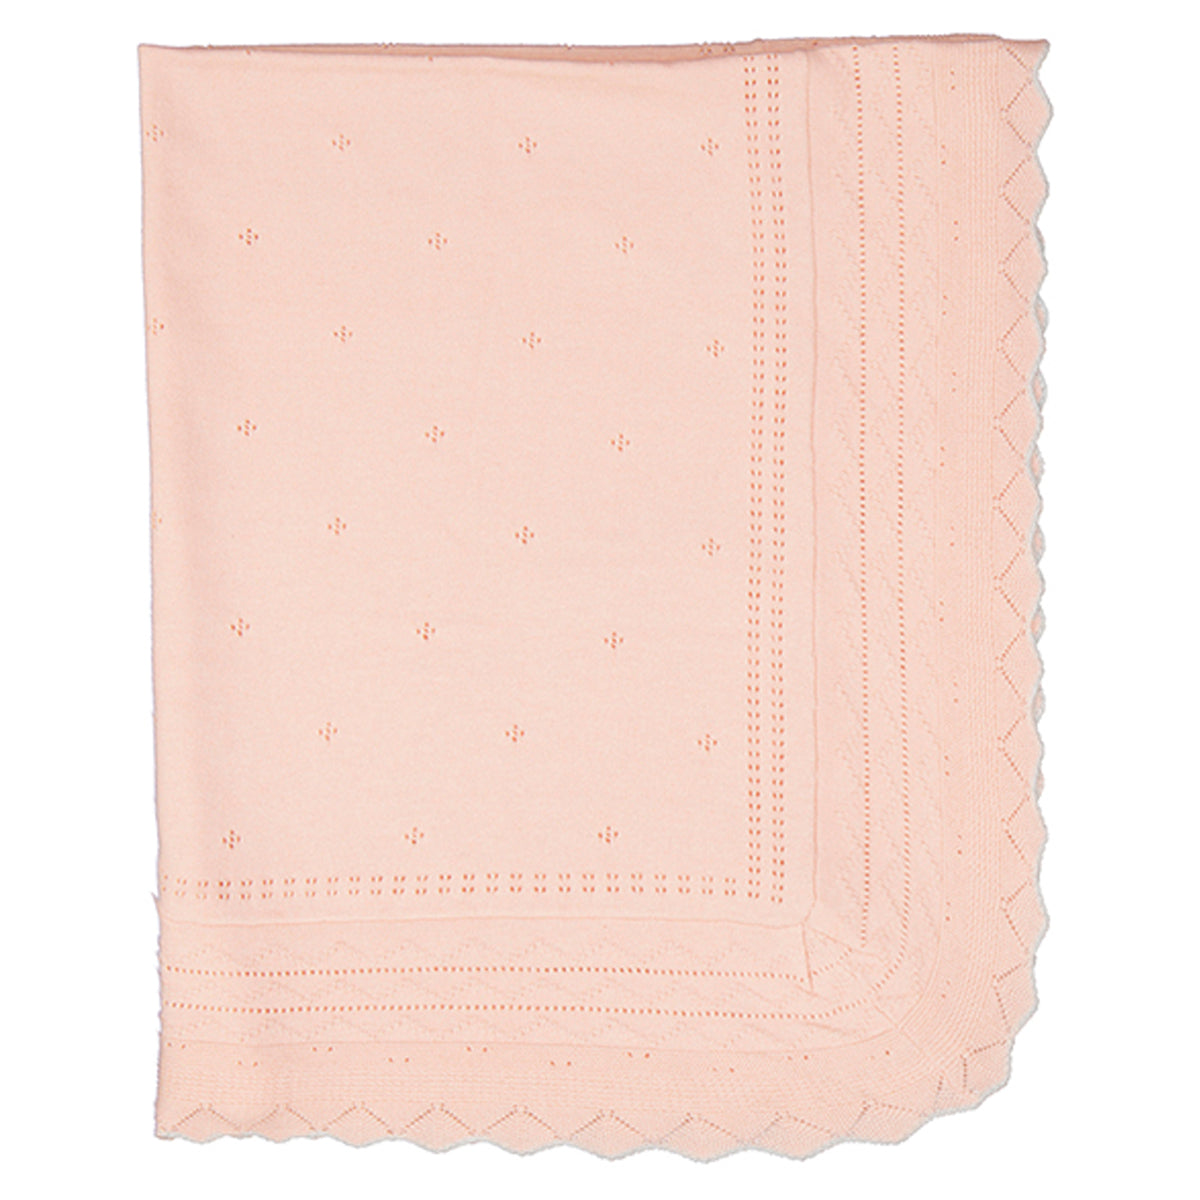 Nude Pink Ruffled Knit Blanket